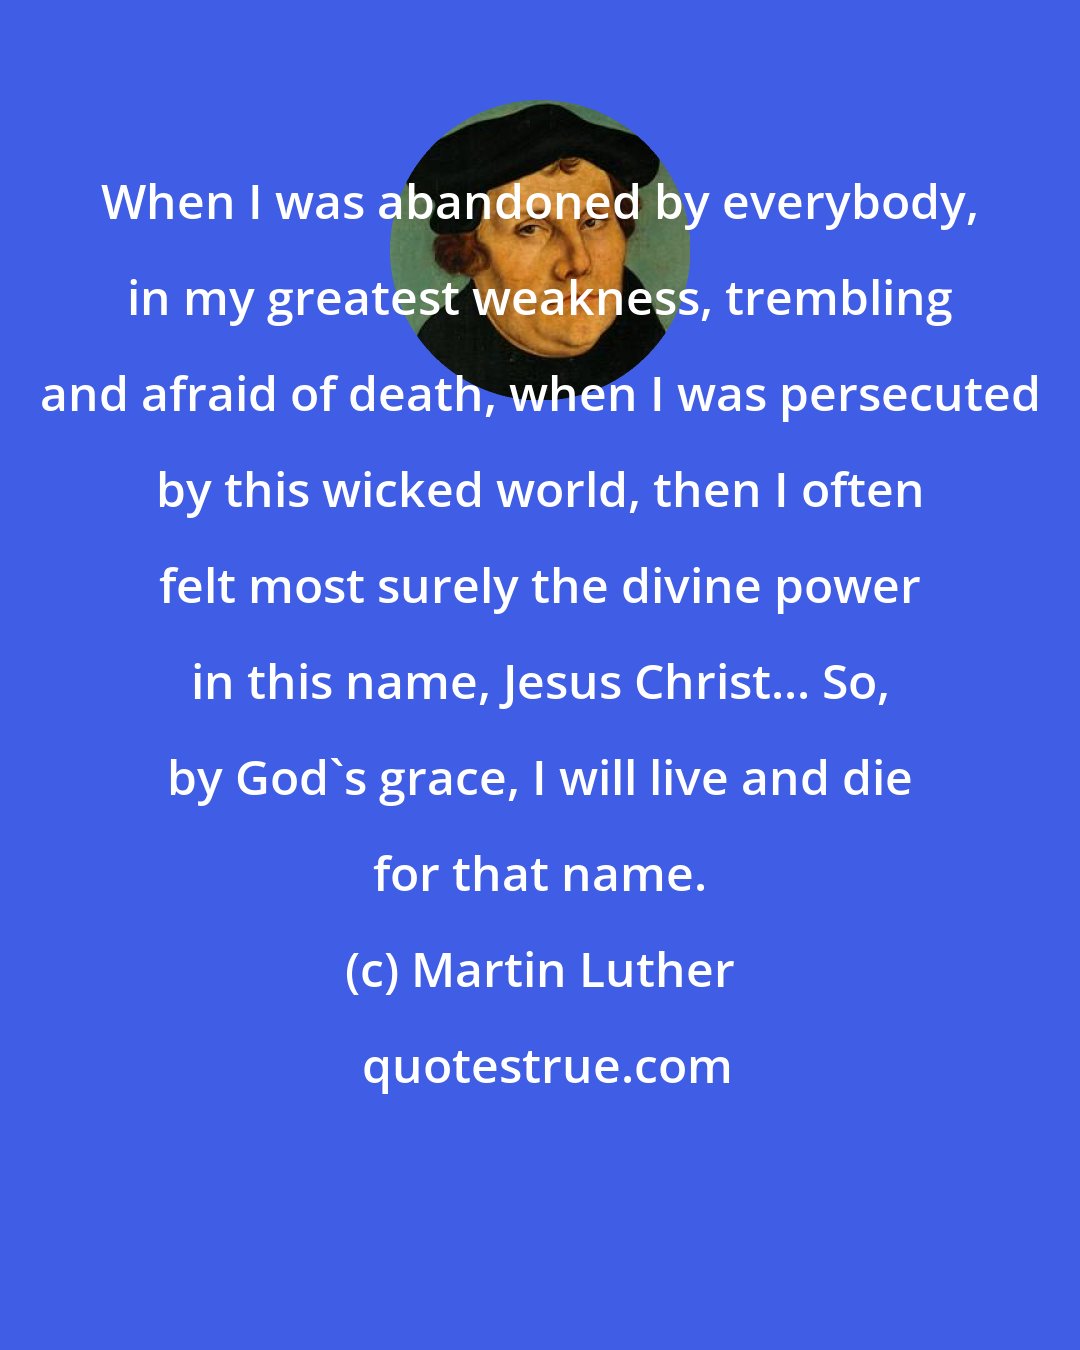 Martin Luther: When I was abandoned by everybody, in my greatest weakness, trembling and afraid of death, when I was persecuted by this wicked world, then I often felt most surely the divine power in this name, Jesus Christ... So, by God's grace, I will live and die for that name.